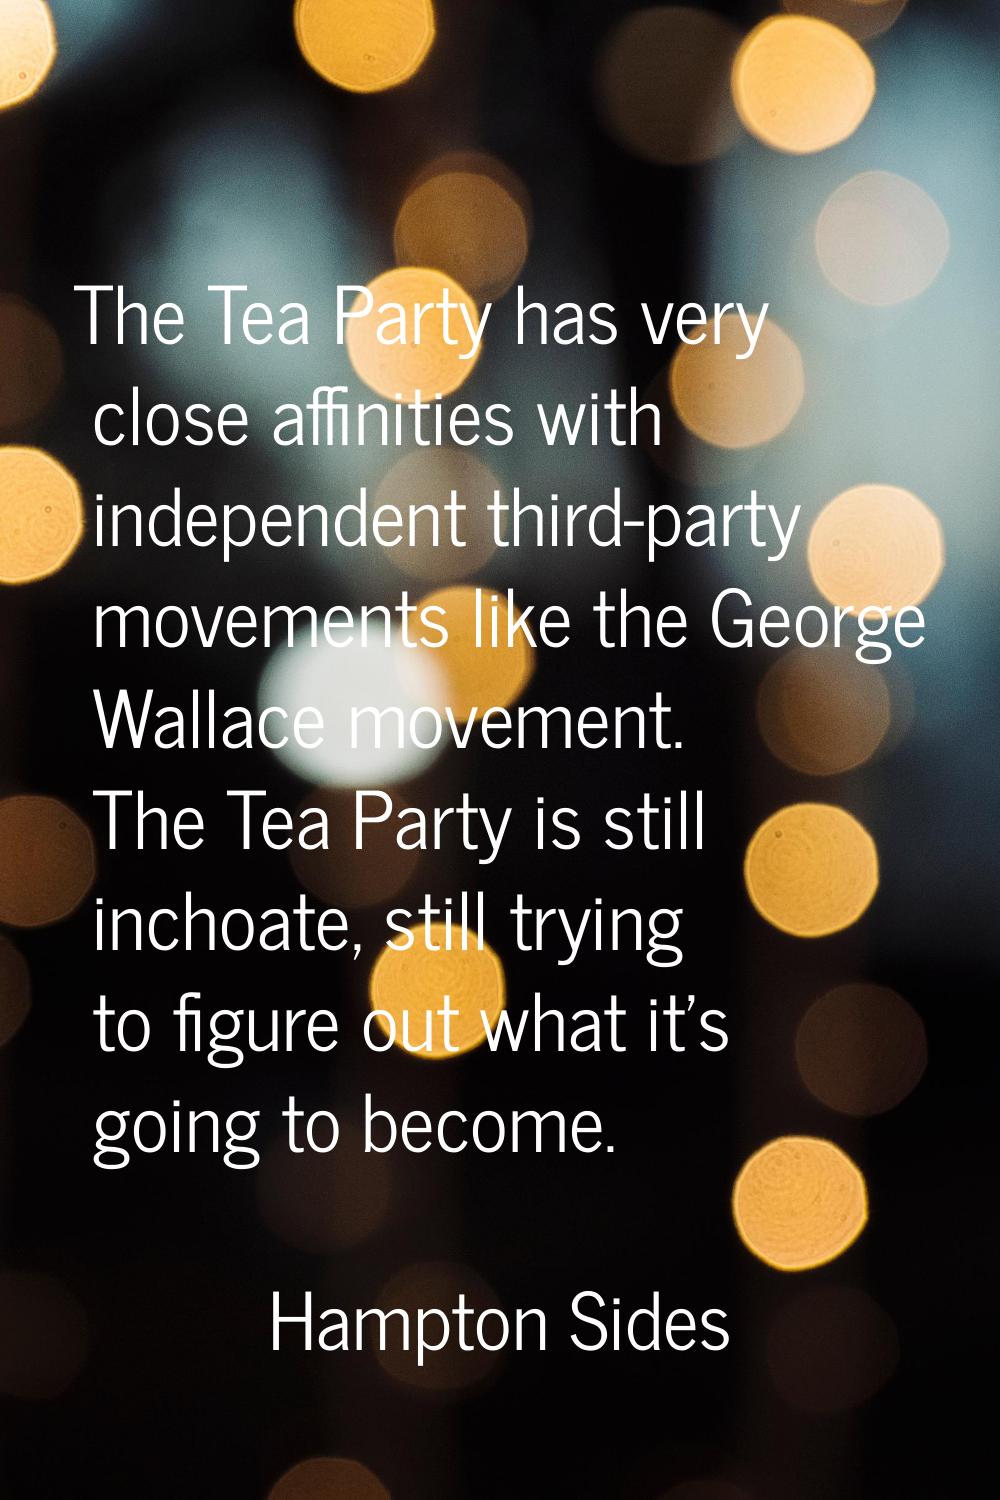 The Tea Party has very close affinities with independent third-party movements like the George Wall